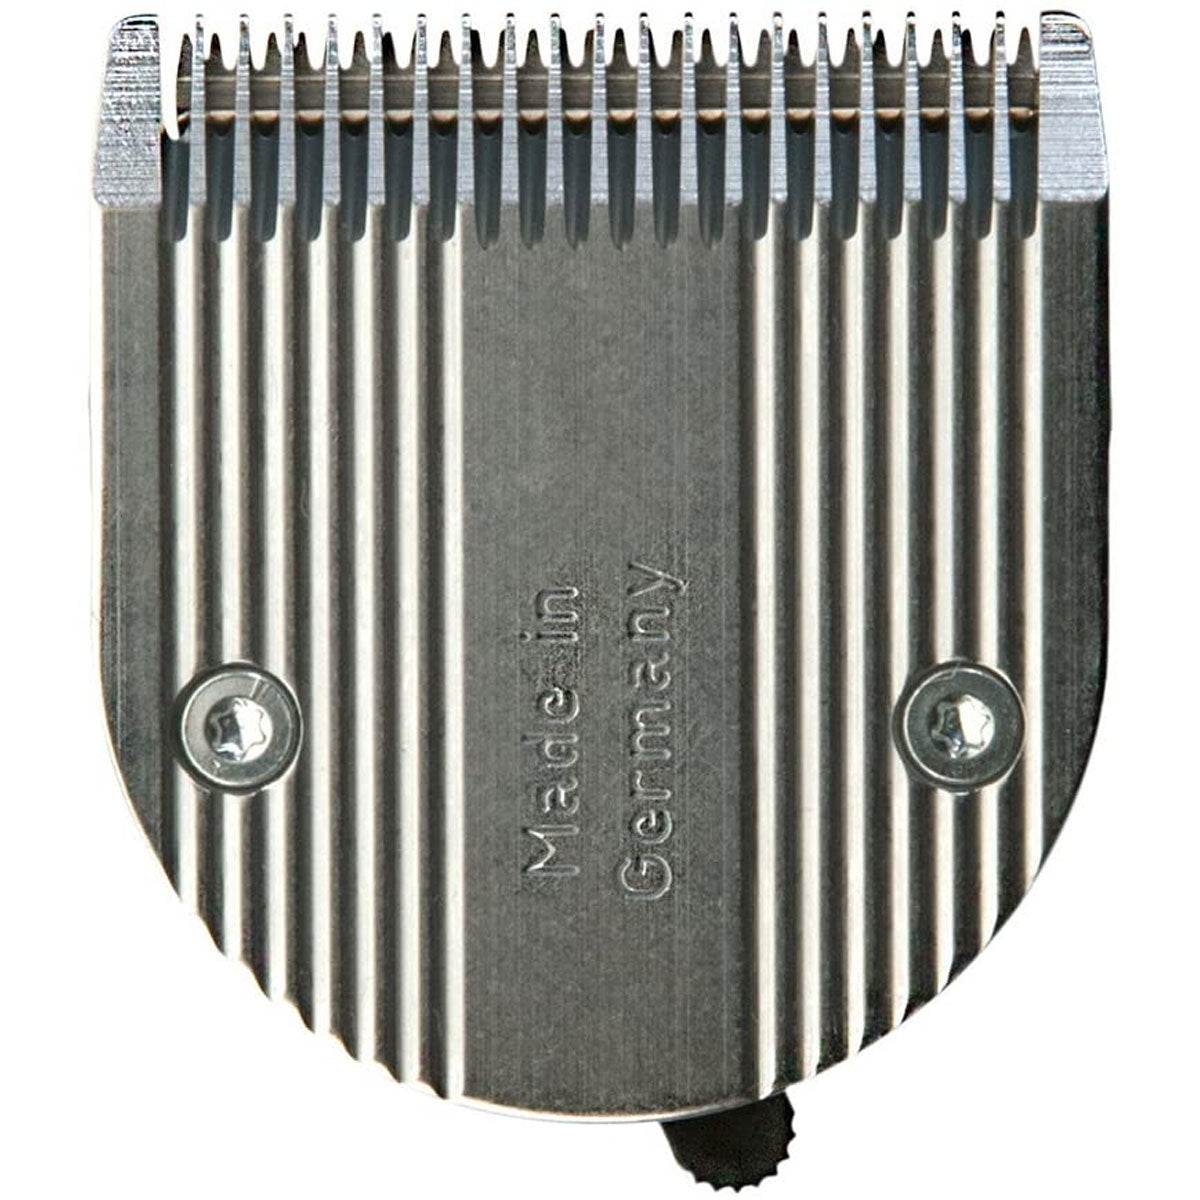 5 - in - 1 Replacement Blade - Coarse